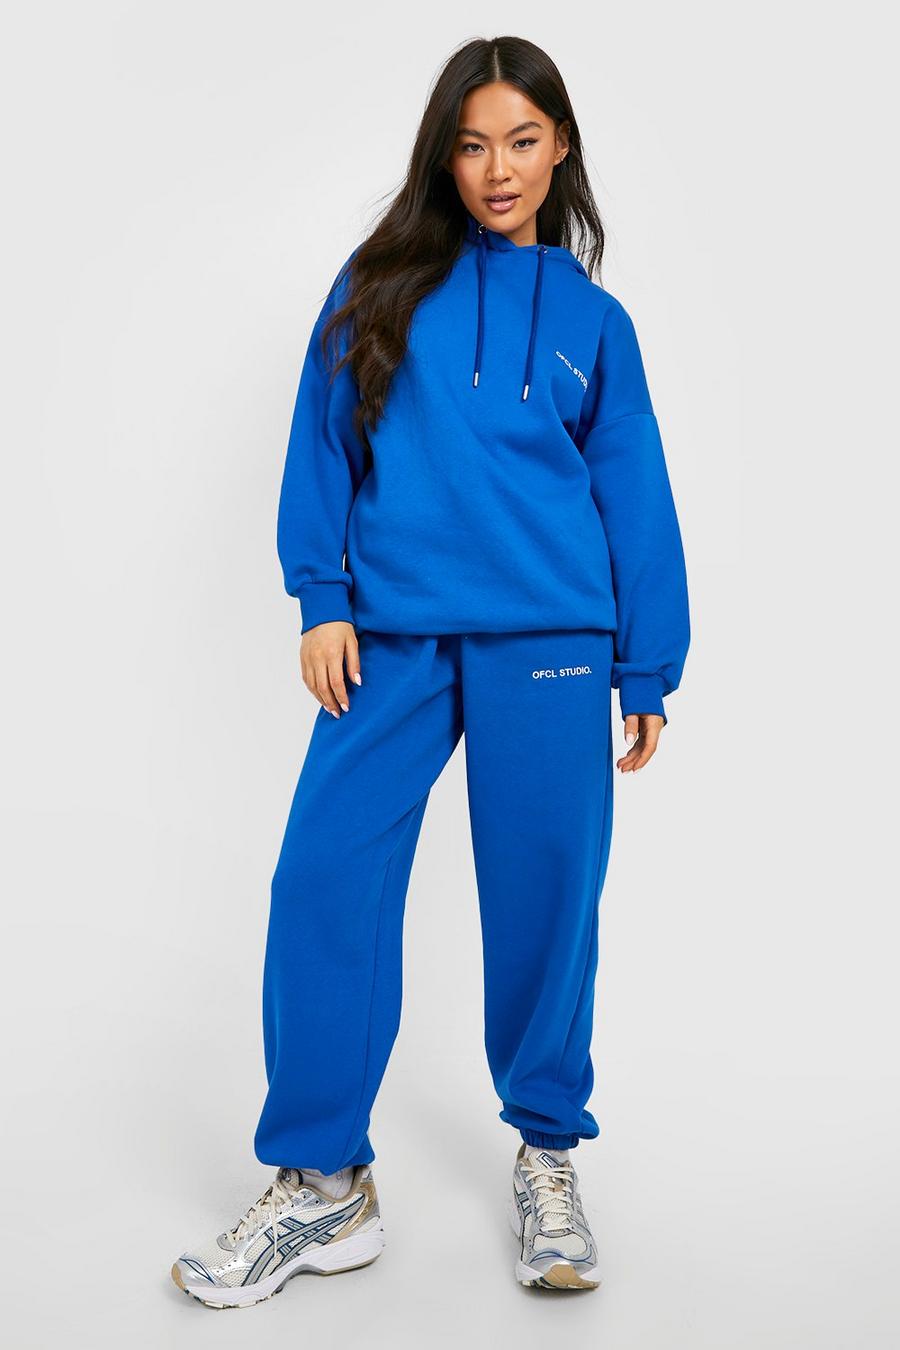 Women's Ofcl Studio Embroidered Hooded Tracksuit | Boohoo UK